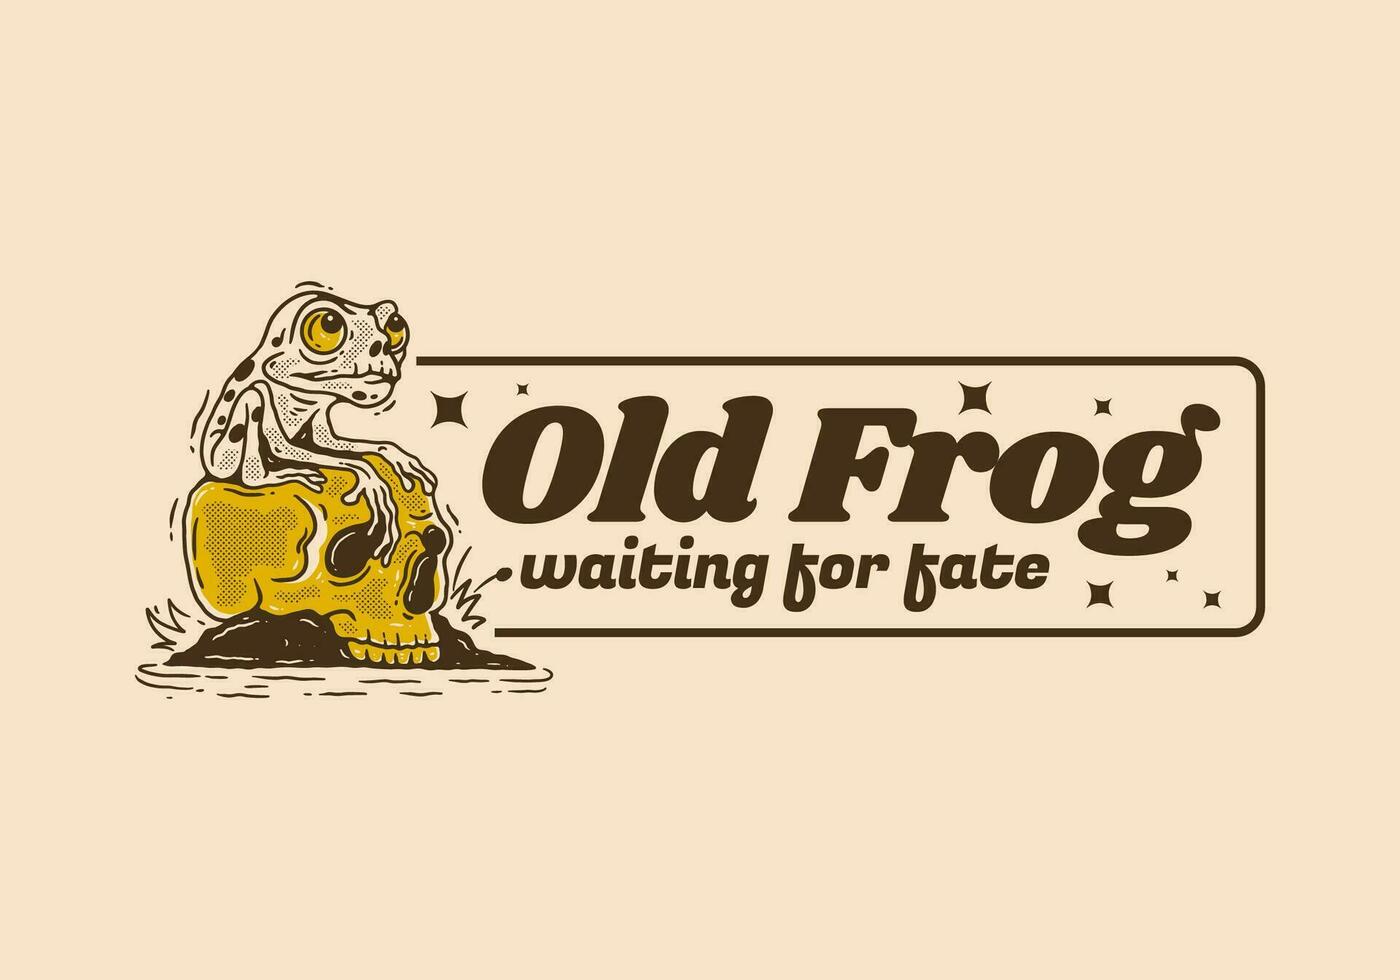 Old frog waiting for fate, Mascot character design of frog perched on the skull vector